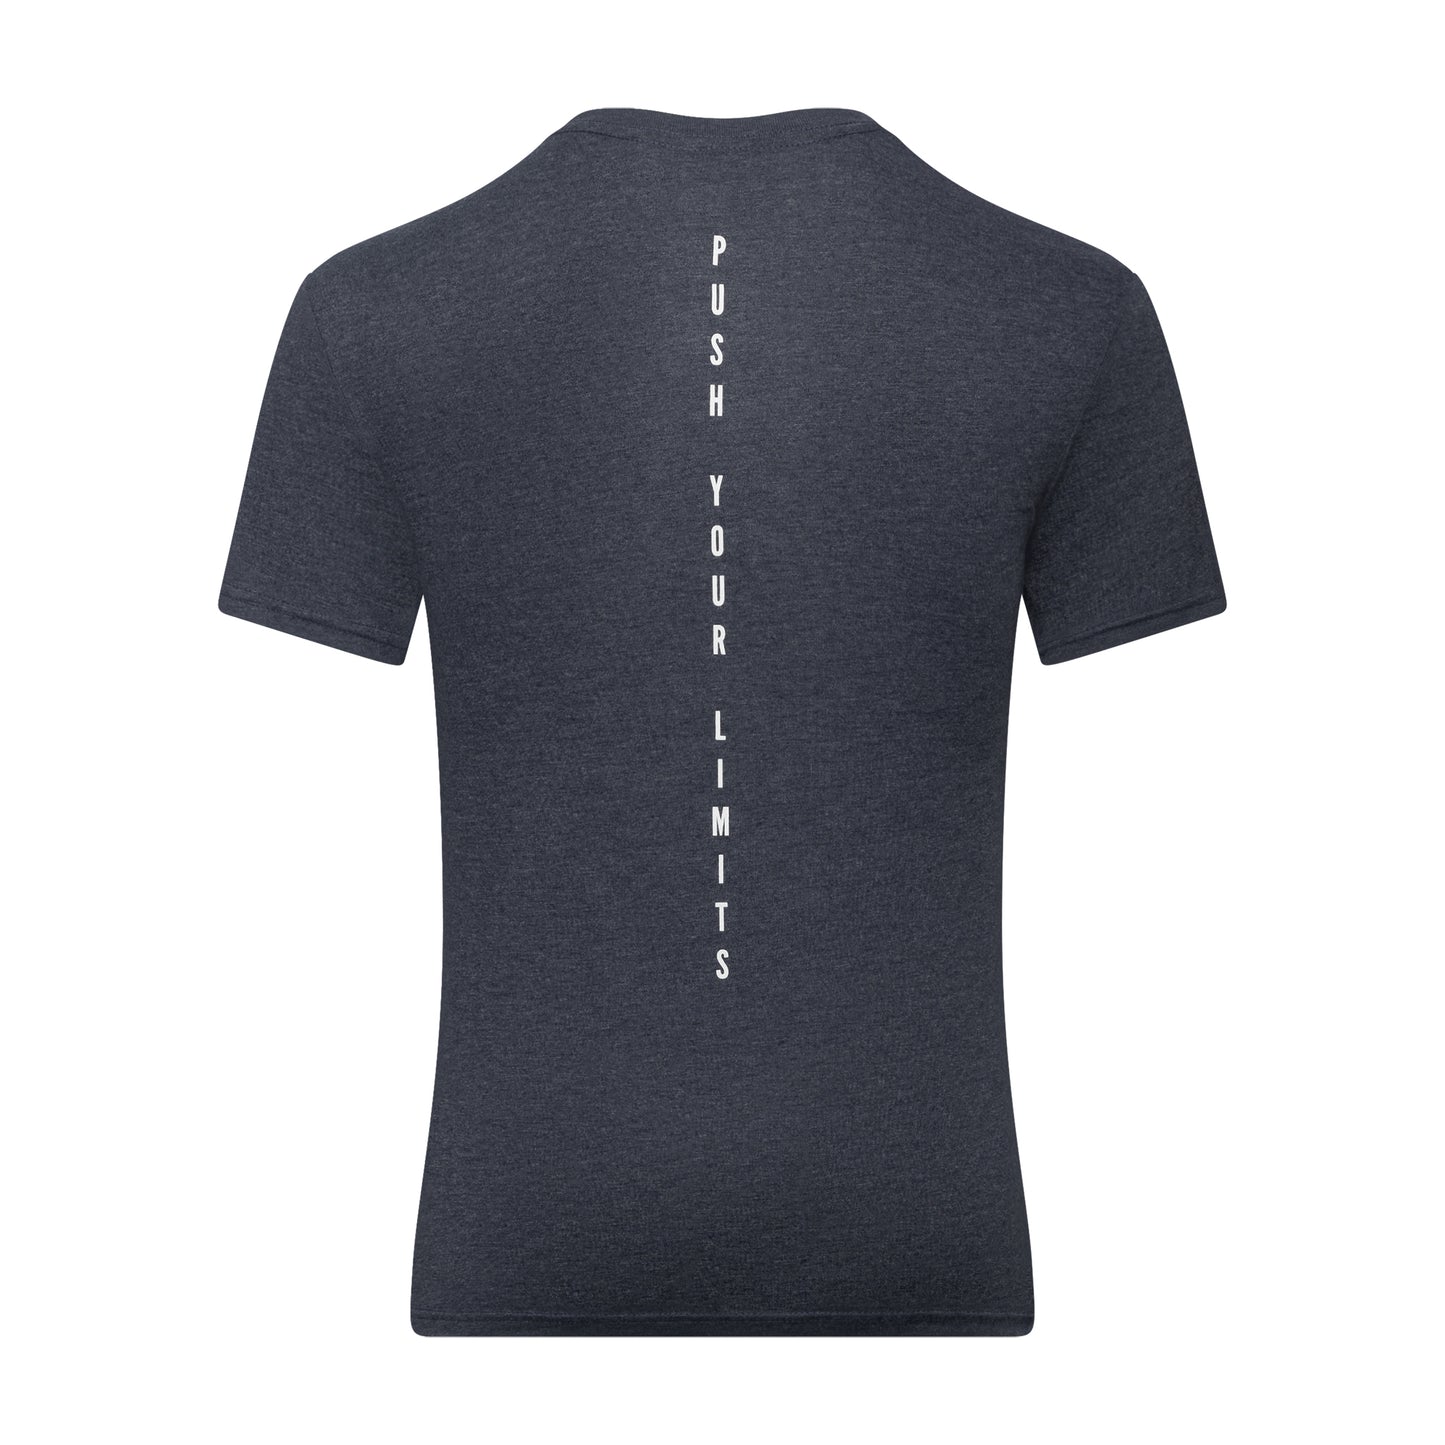 impossible-shirt-navy-back